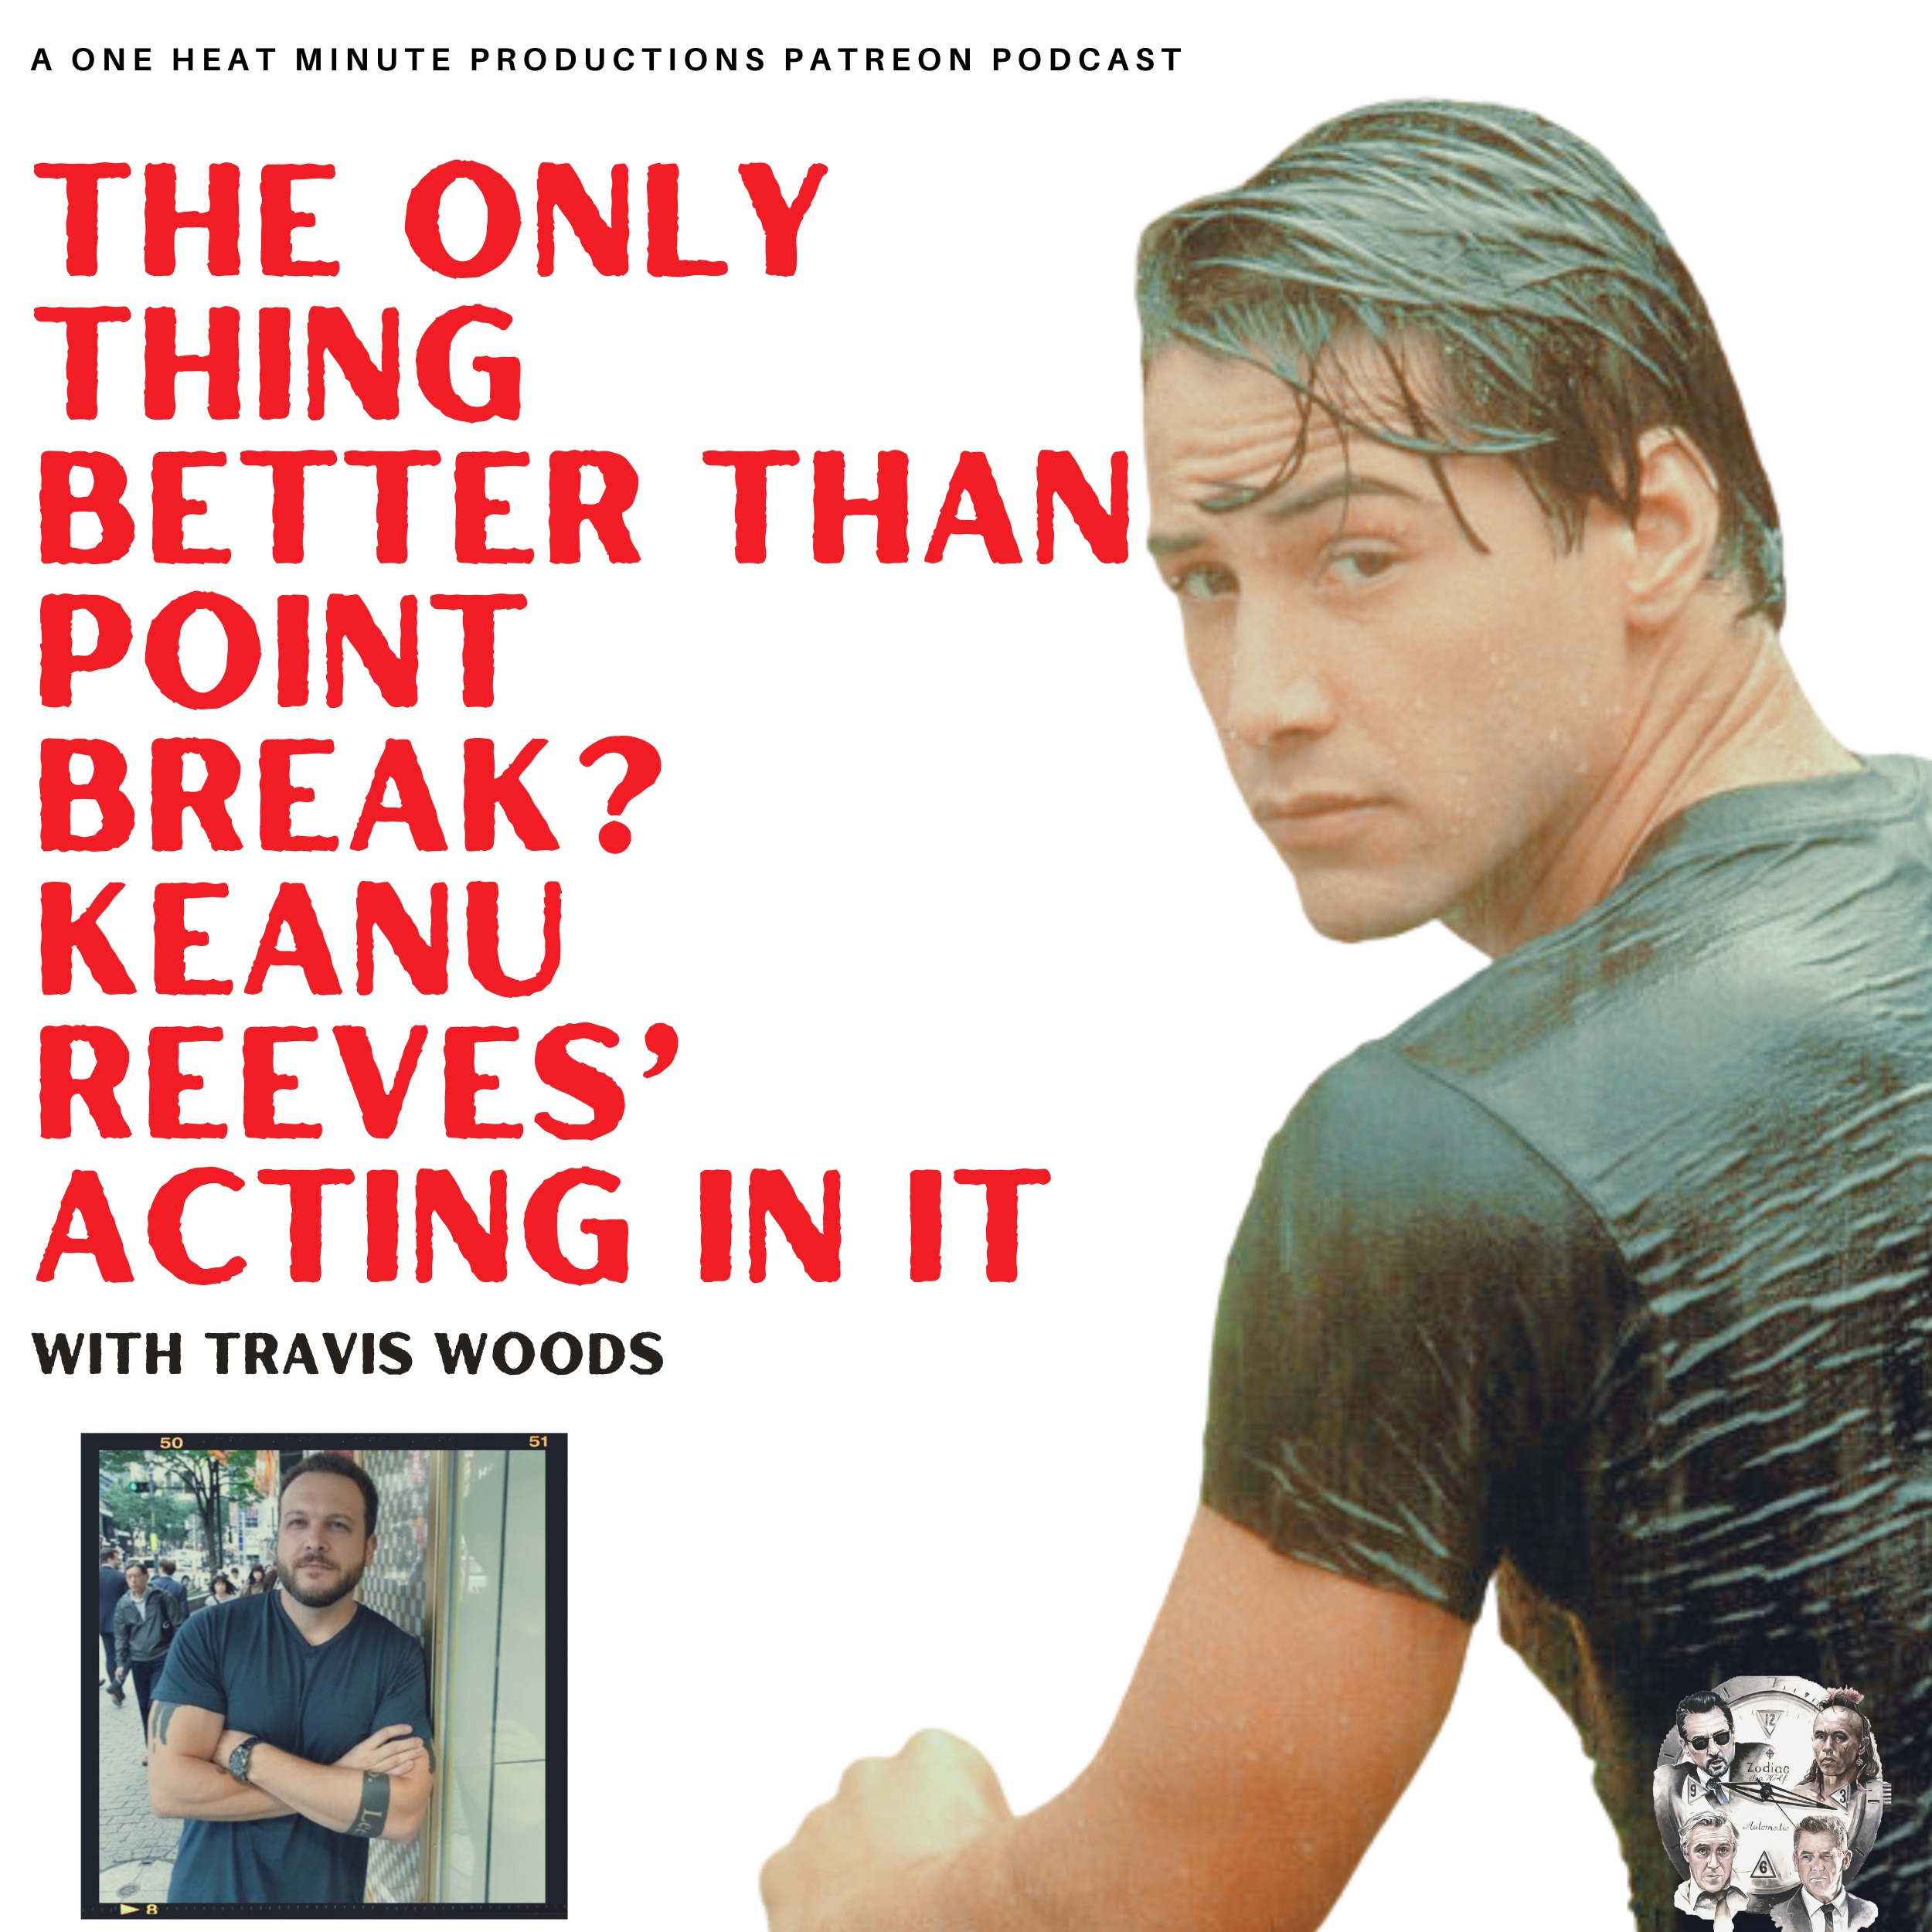 PATREON BONUS: The only thing better than Point Break? Keanu Reeves’ acting in it with Travis Woods